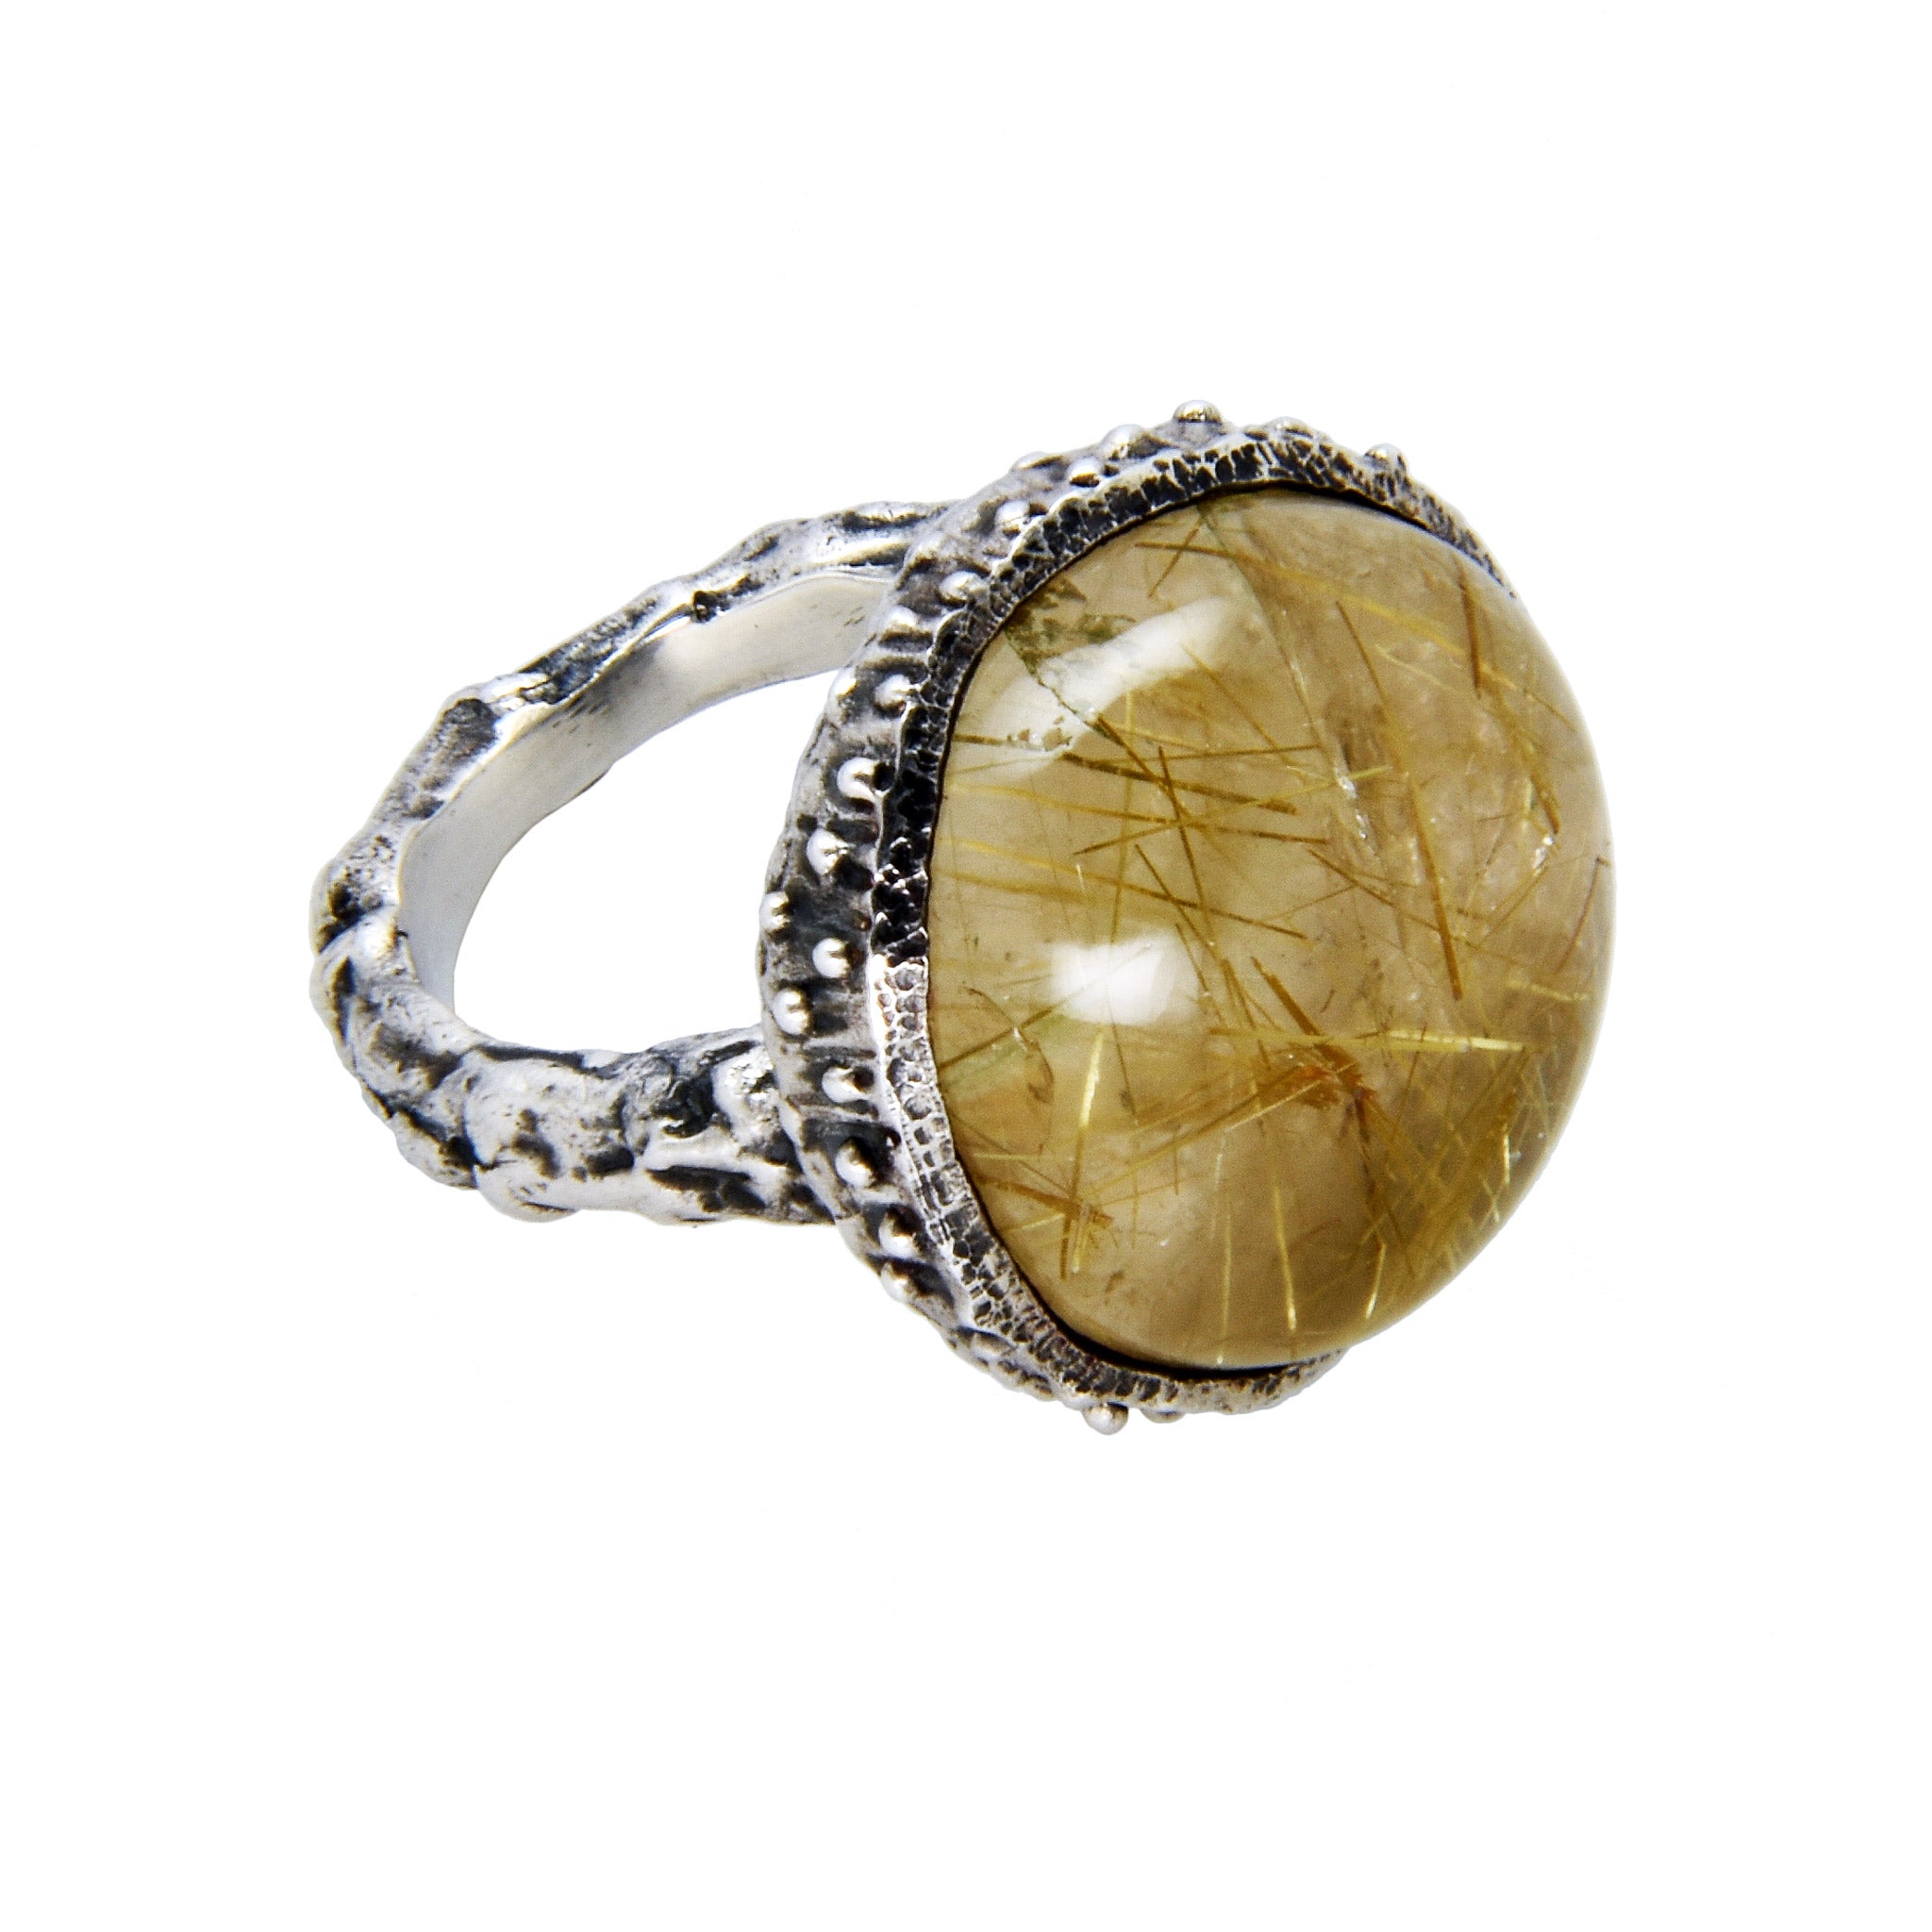 Acorn Ring with Rutilated Quartz - Oxidized Sterling Silver - US Size 6.5